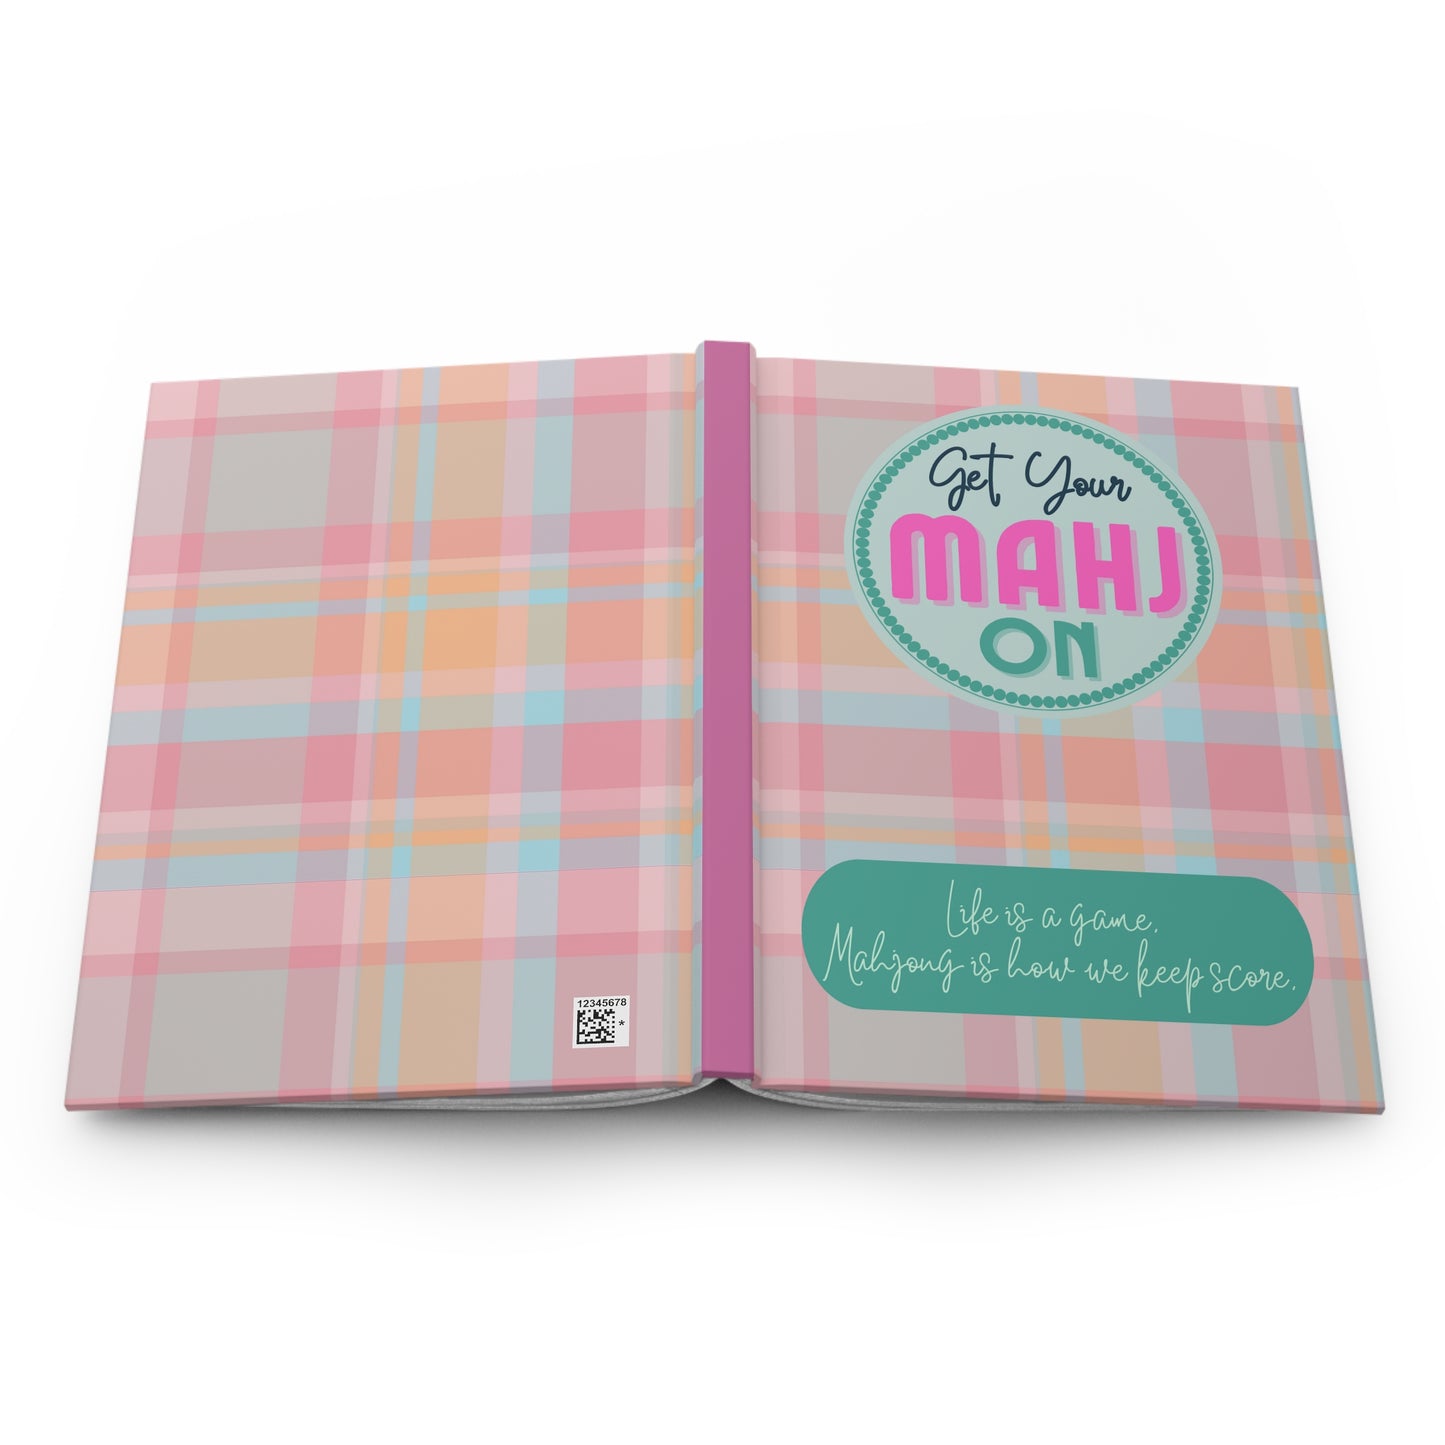 Mahjong Score Notebook, Plaid- Mah-jongg journal to note memories and scores through time. Great gift!